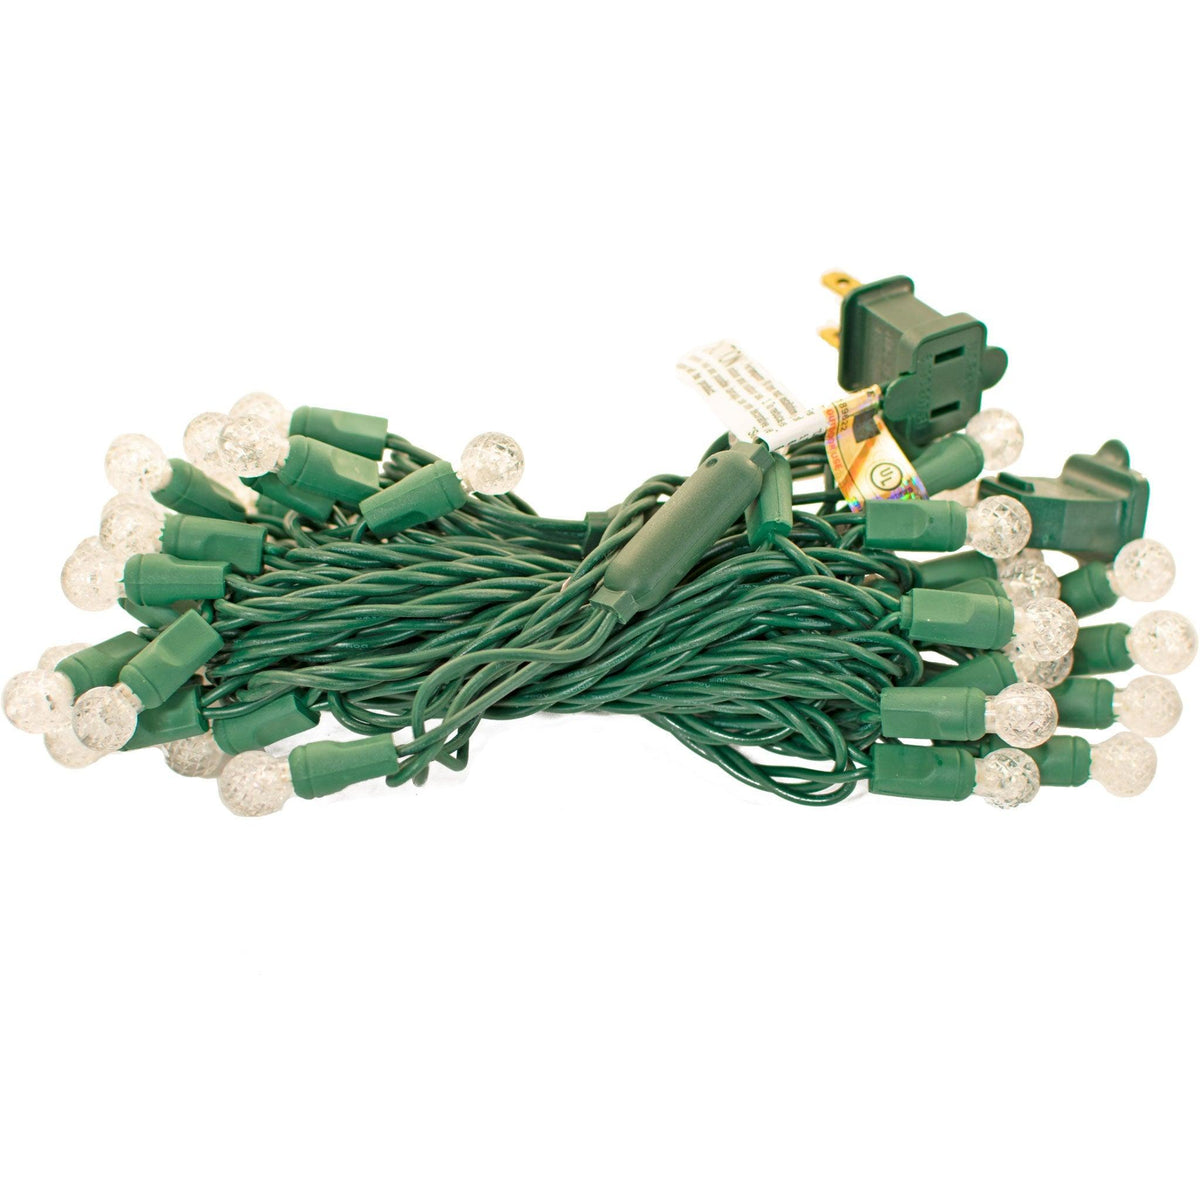 Buy Lee Display's brand new G12 Warm White LED Christmas String Lights with Green Wire and Steady Bulbs at leedisplay.com